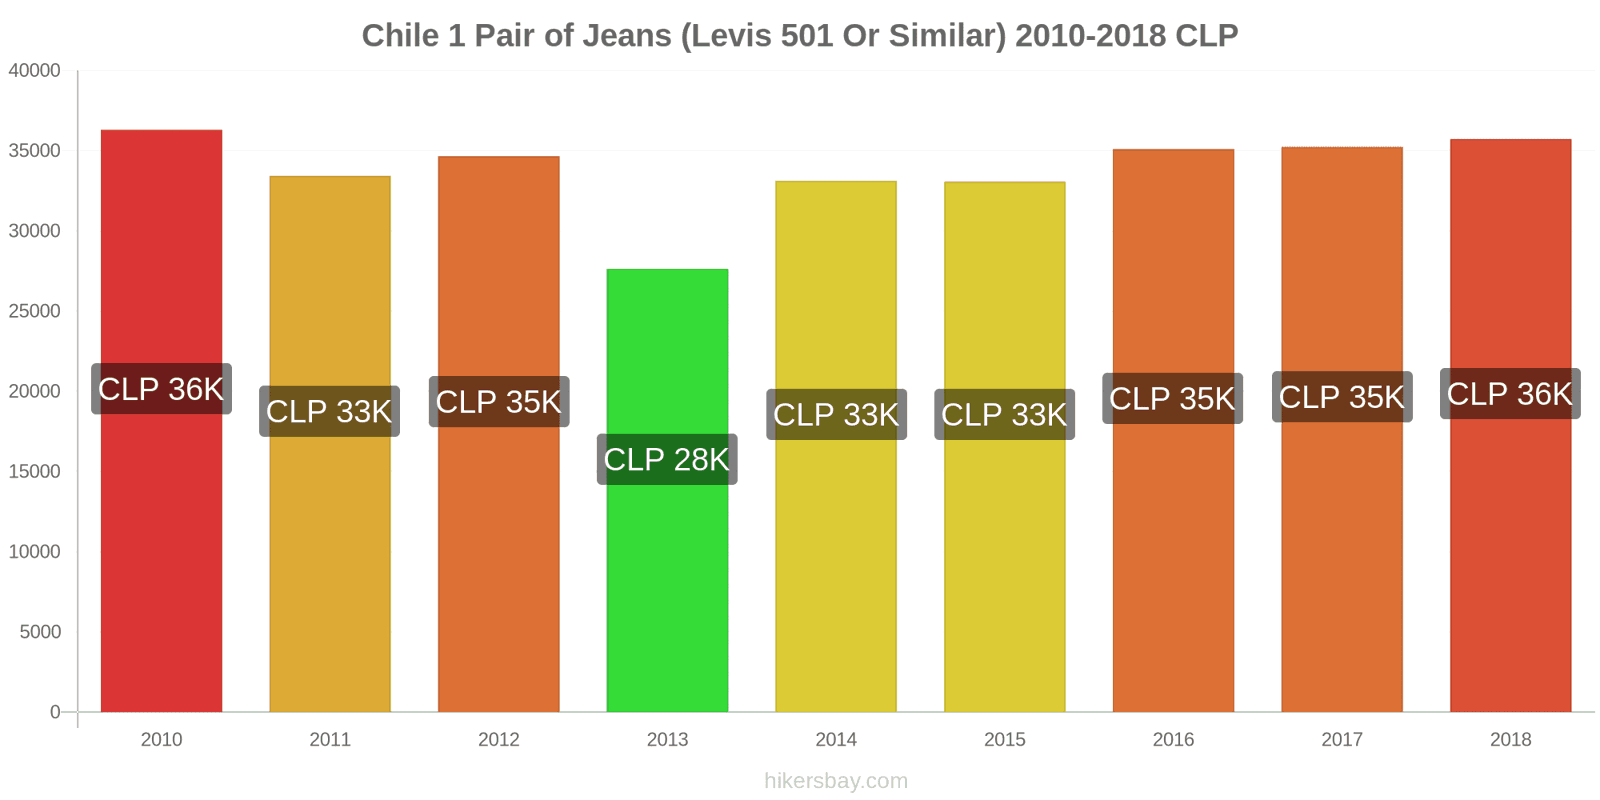 Chile price changes 1 pair of jeans (Levis 501 or similar) hikersbay.com